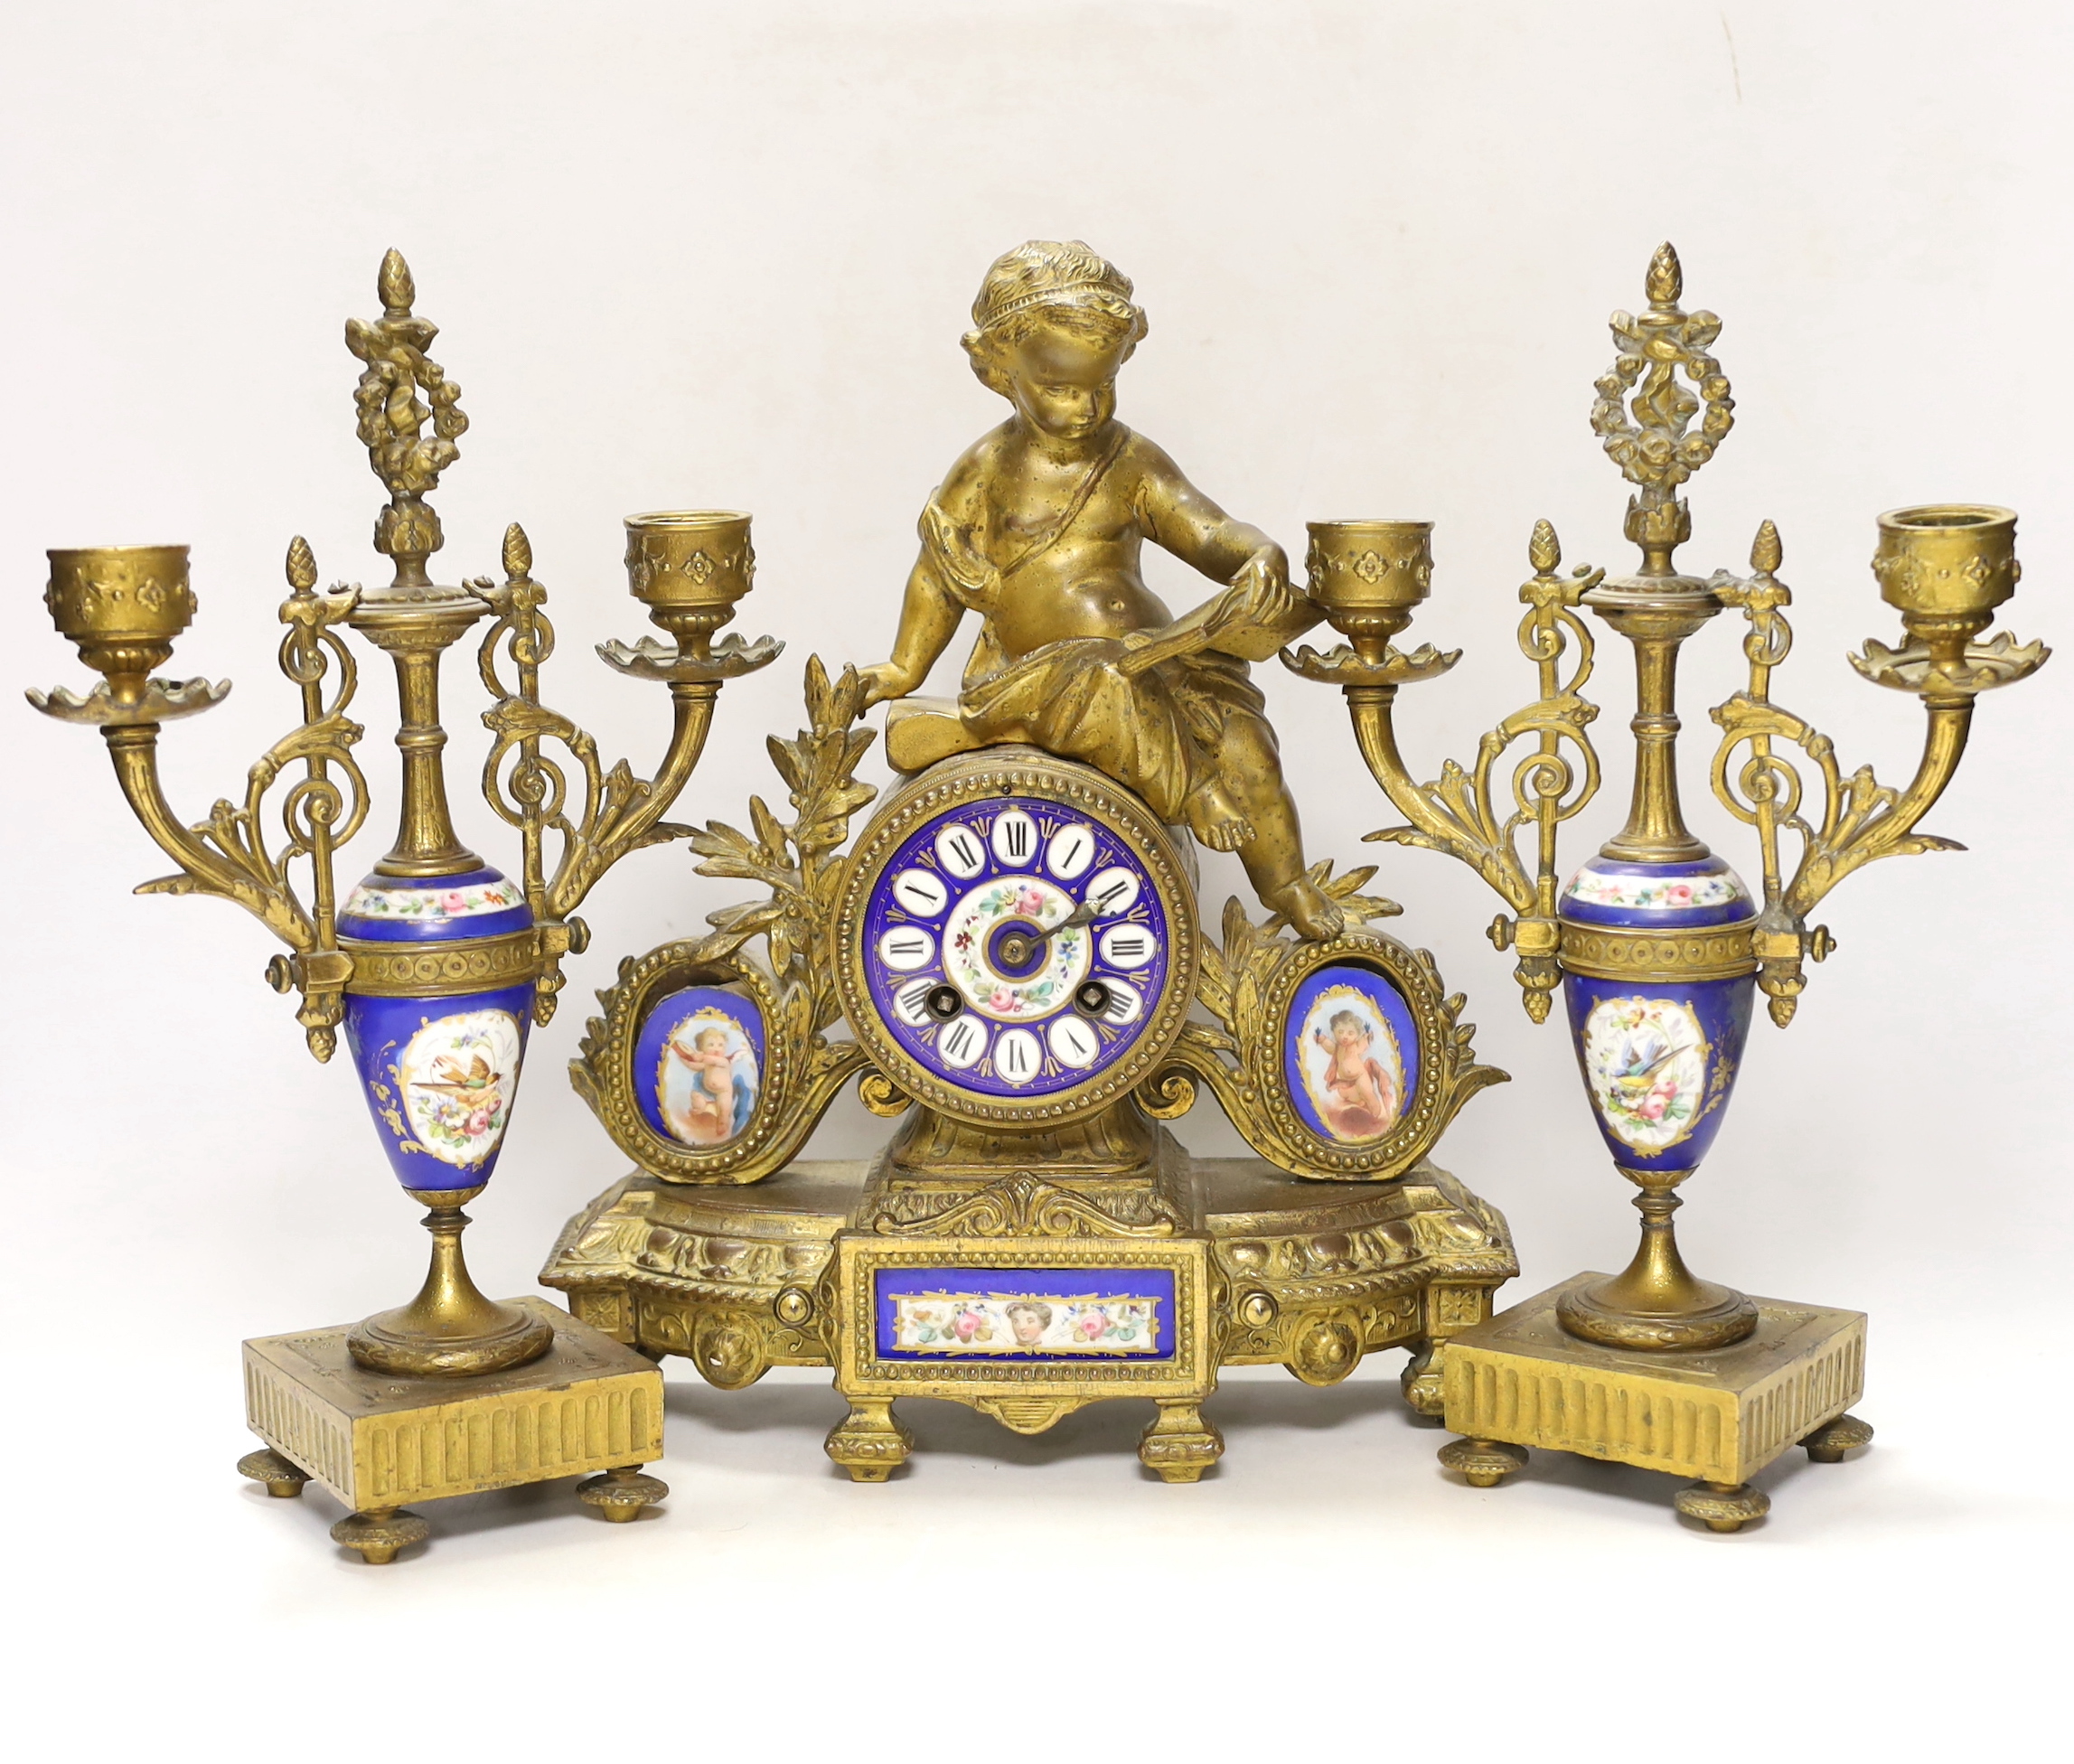 A 19th century ornate French gilt brass and porcelain clock, with two matching two branch candelabra garnitures, clock 31cm high